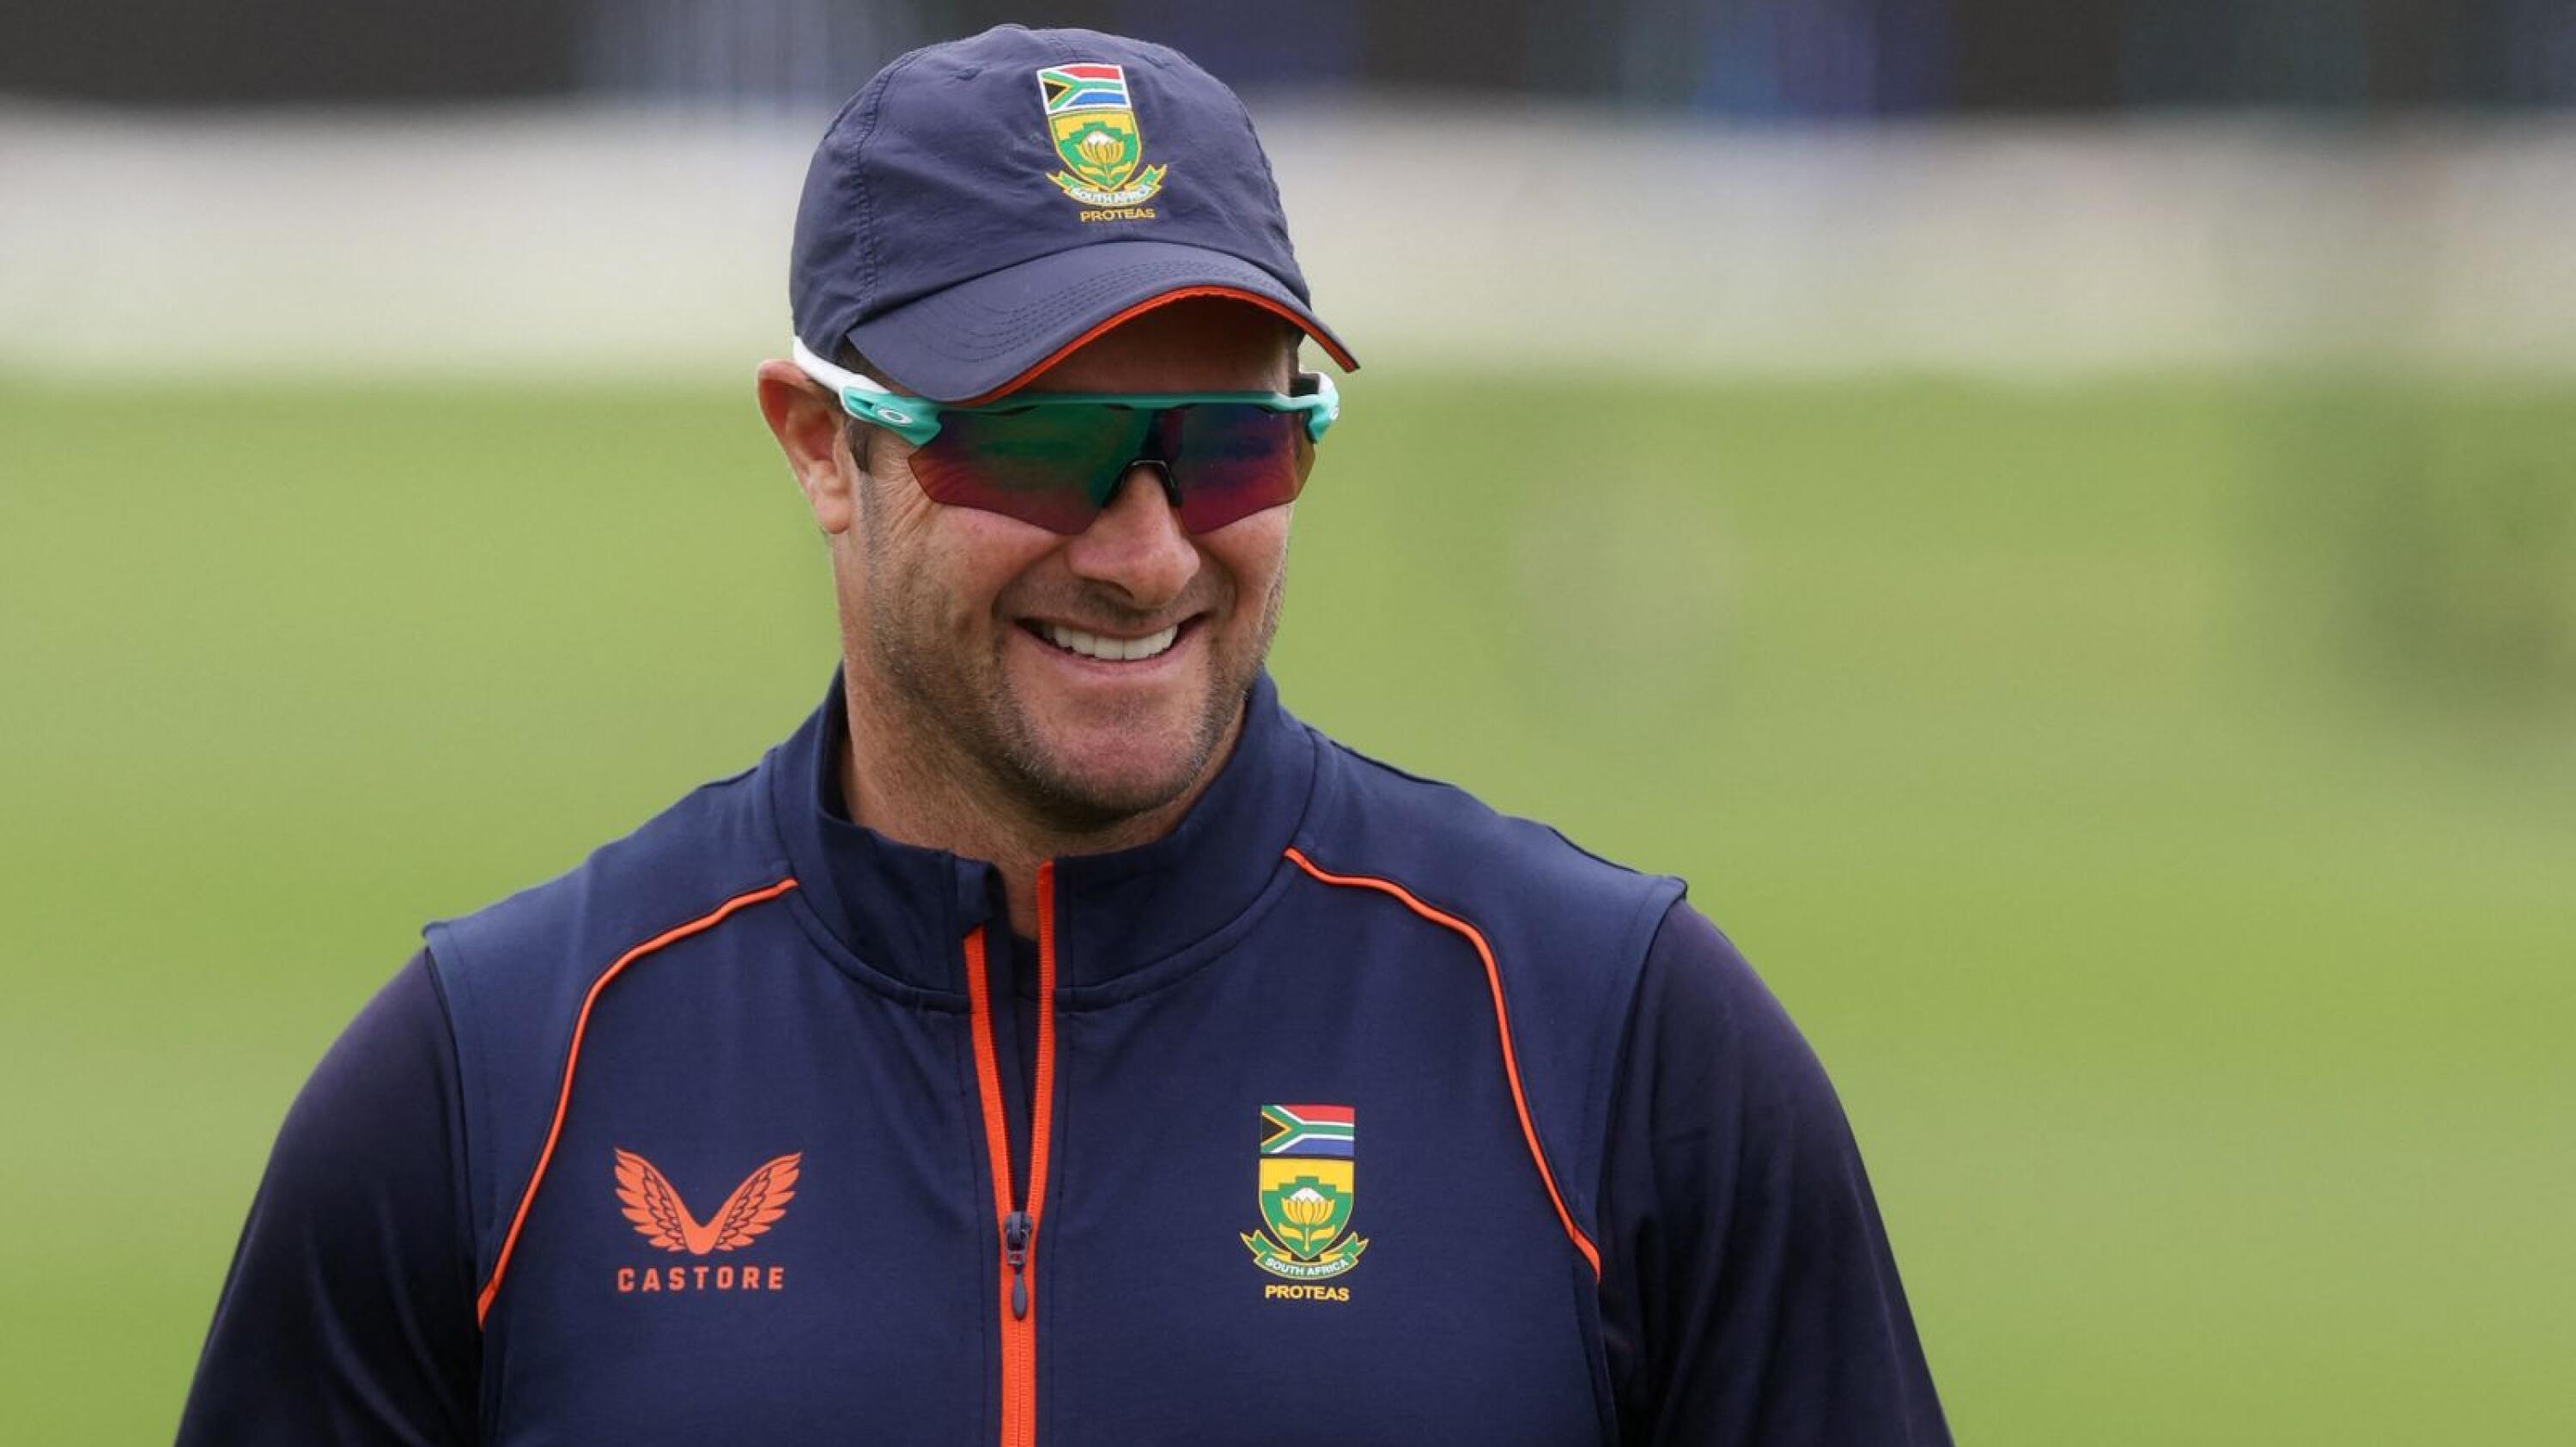 Cricket South Africa have announced that Mark Boucher will stand down from his role as Proteas coach after the T20 World Cup in Australia